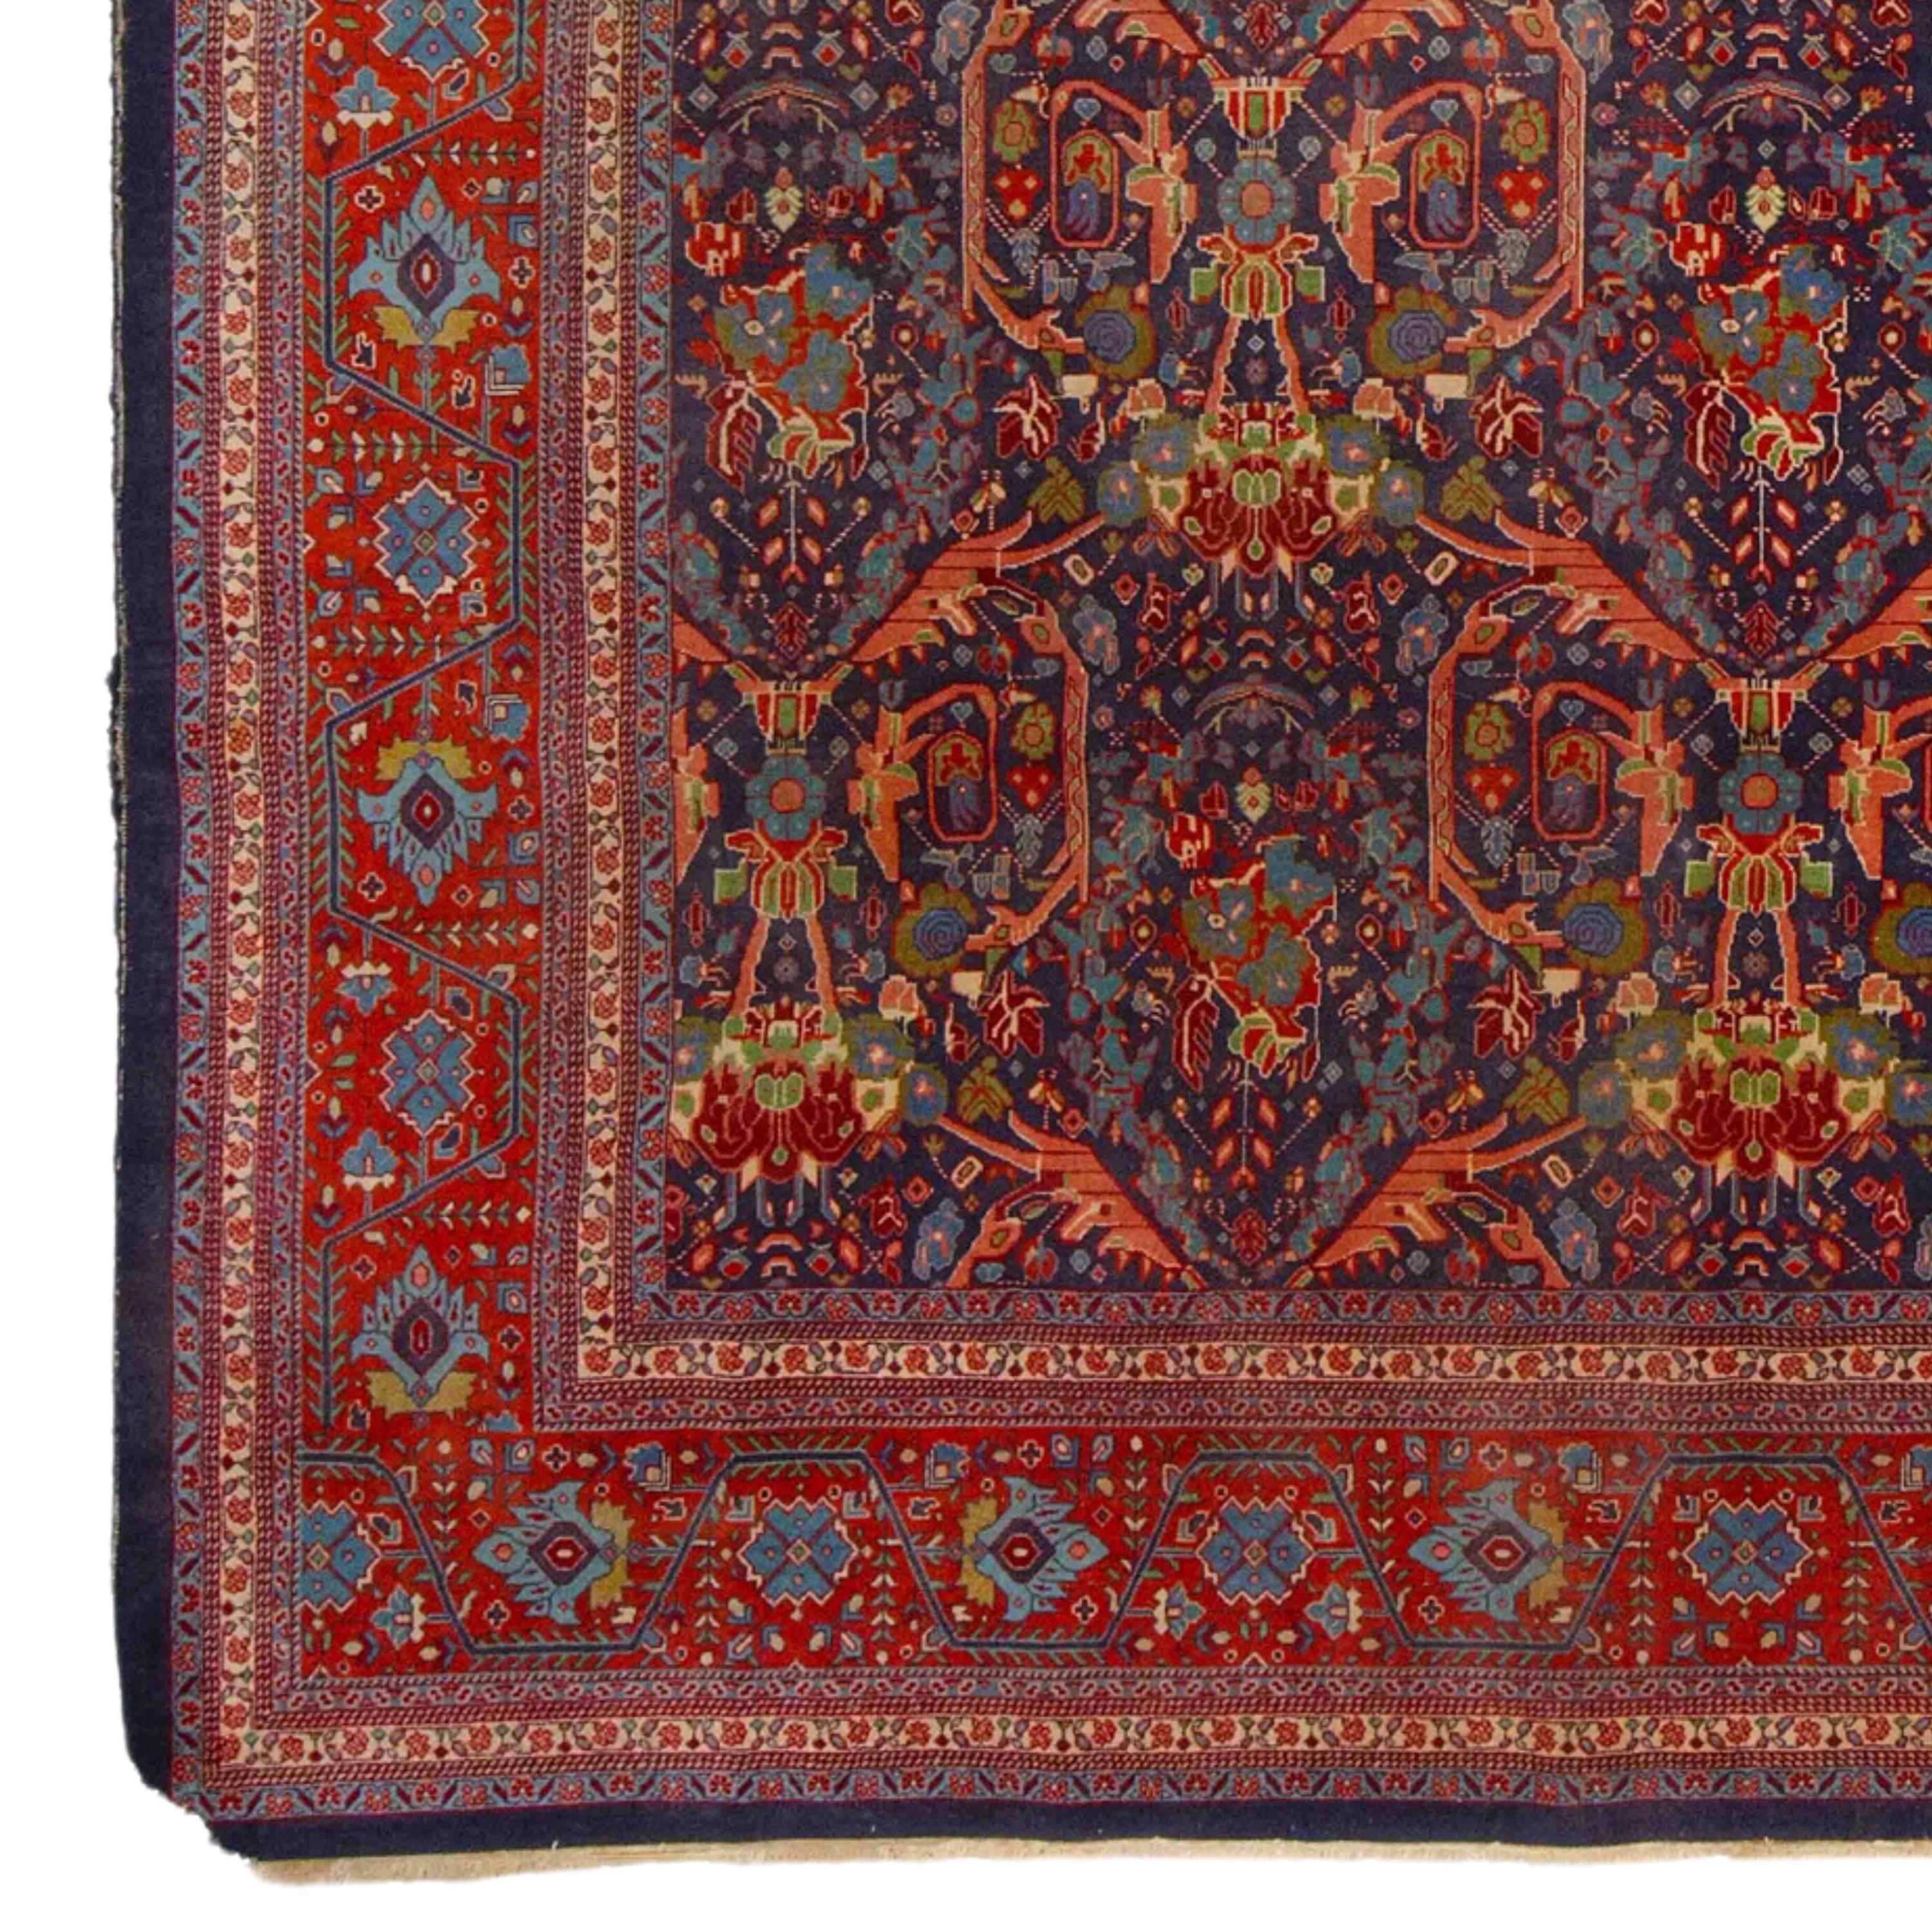 Antique Tabriz Rug 255x370 cm (8,36 x 12,13 ft) Late of 19th Century Tebriz Rug

From the mid-19th century, there was a revival in commercial carpet production in Azerbaijan, and Tabriz became one of the country's most important centers producing